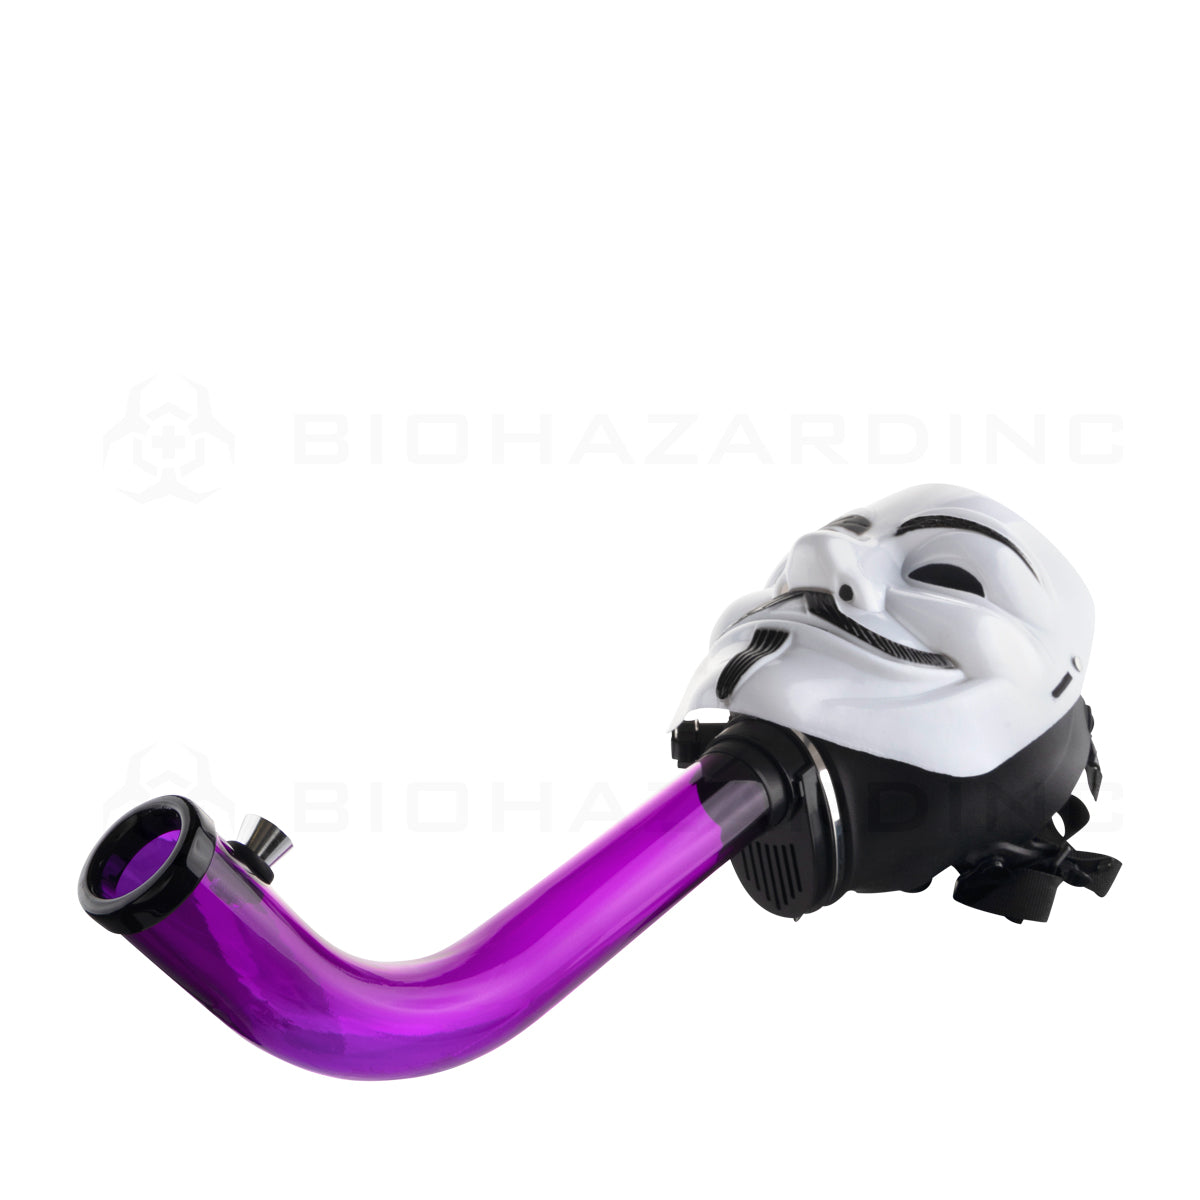 Gas Mask | Guy Fawkes Mask Black & White Steamroller | 12" - Acrylic - Assorted Colors Acrylic Bong with Gas Mask Biohazard Inc   